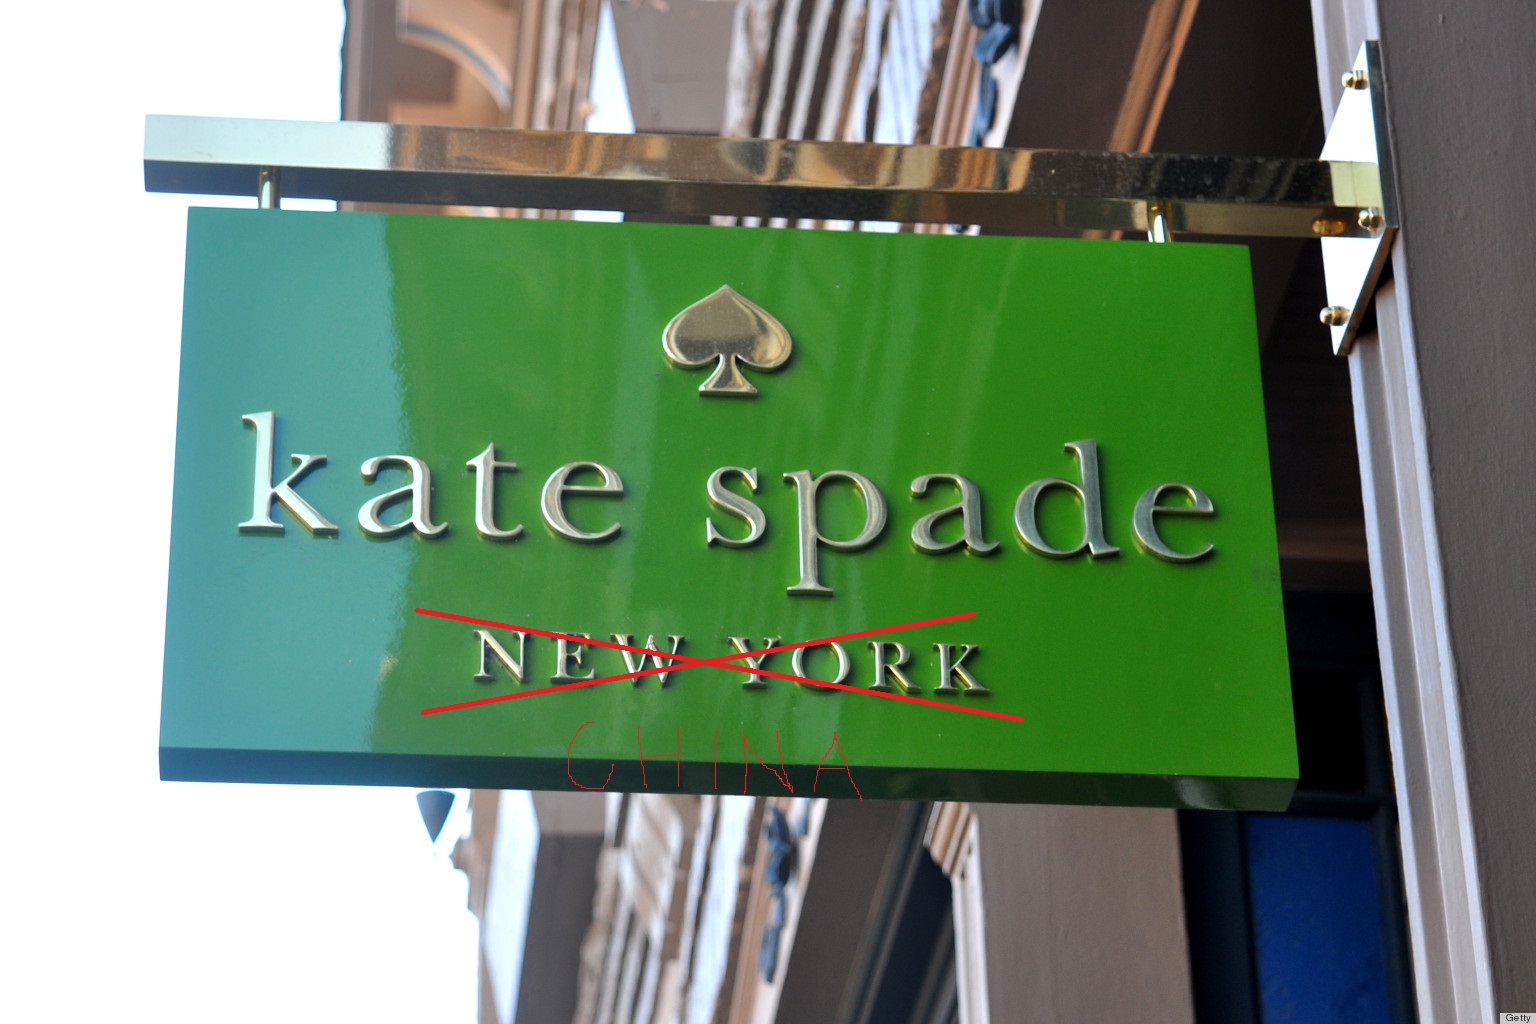 Kate Spade is made in China